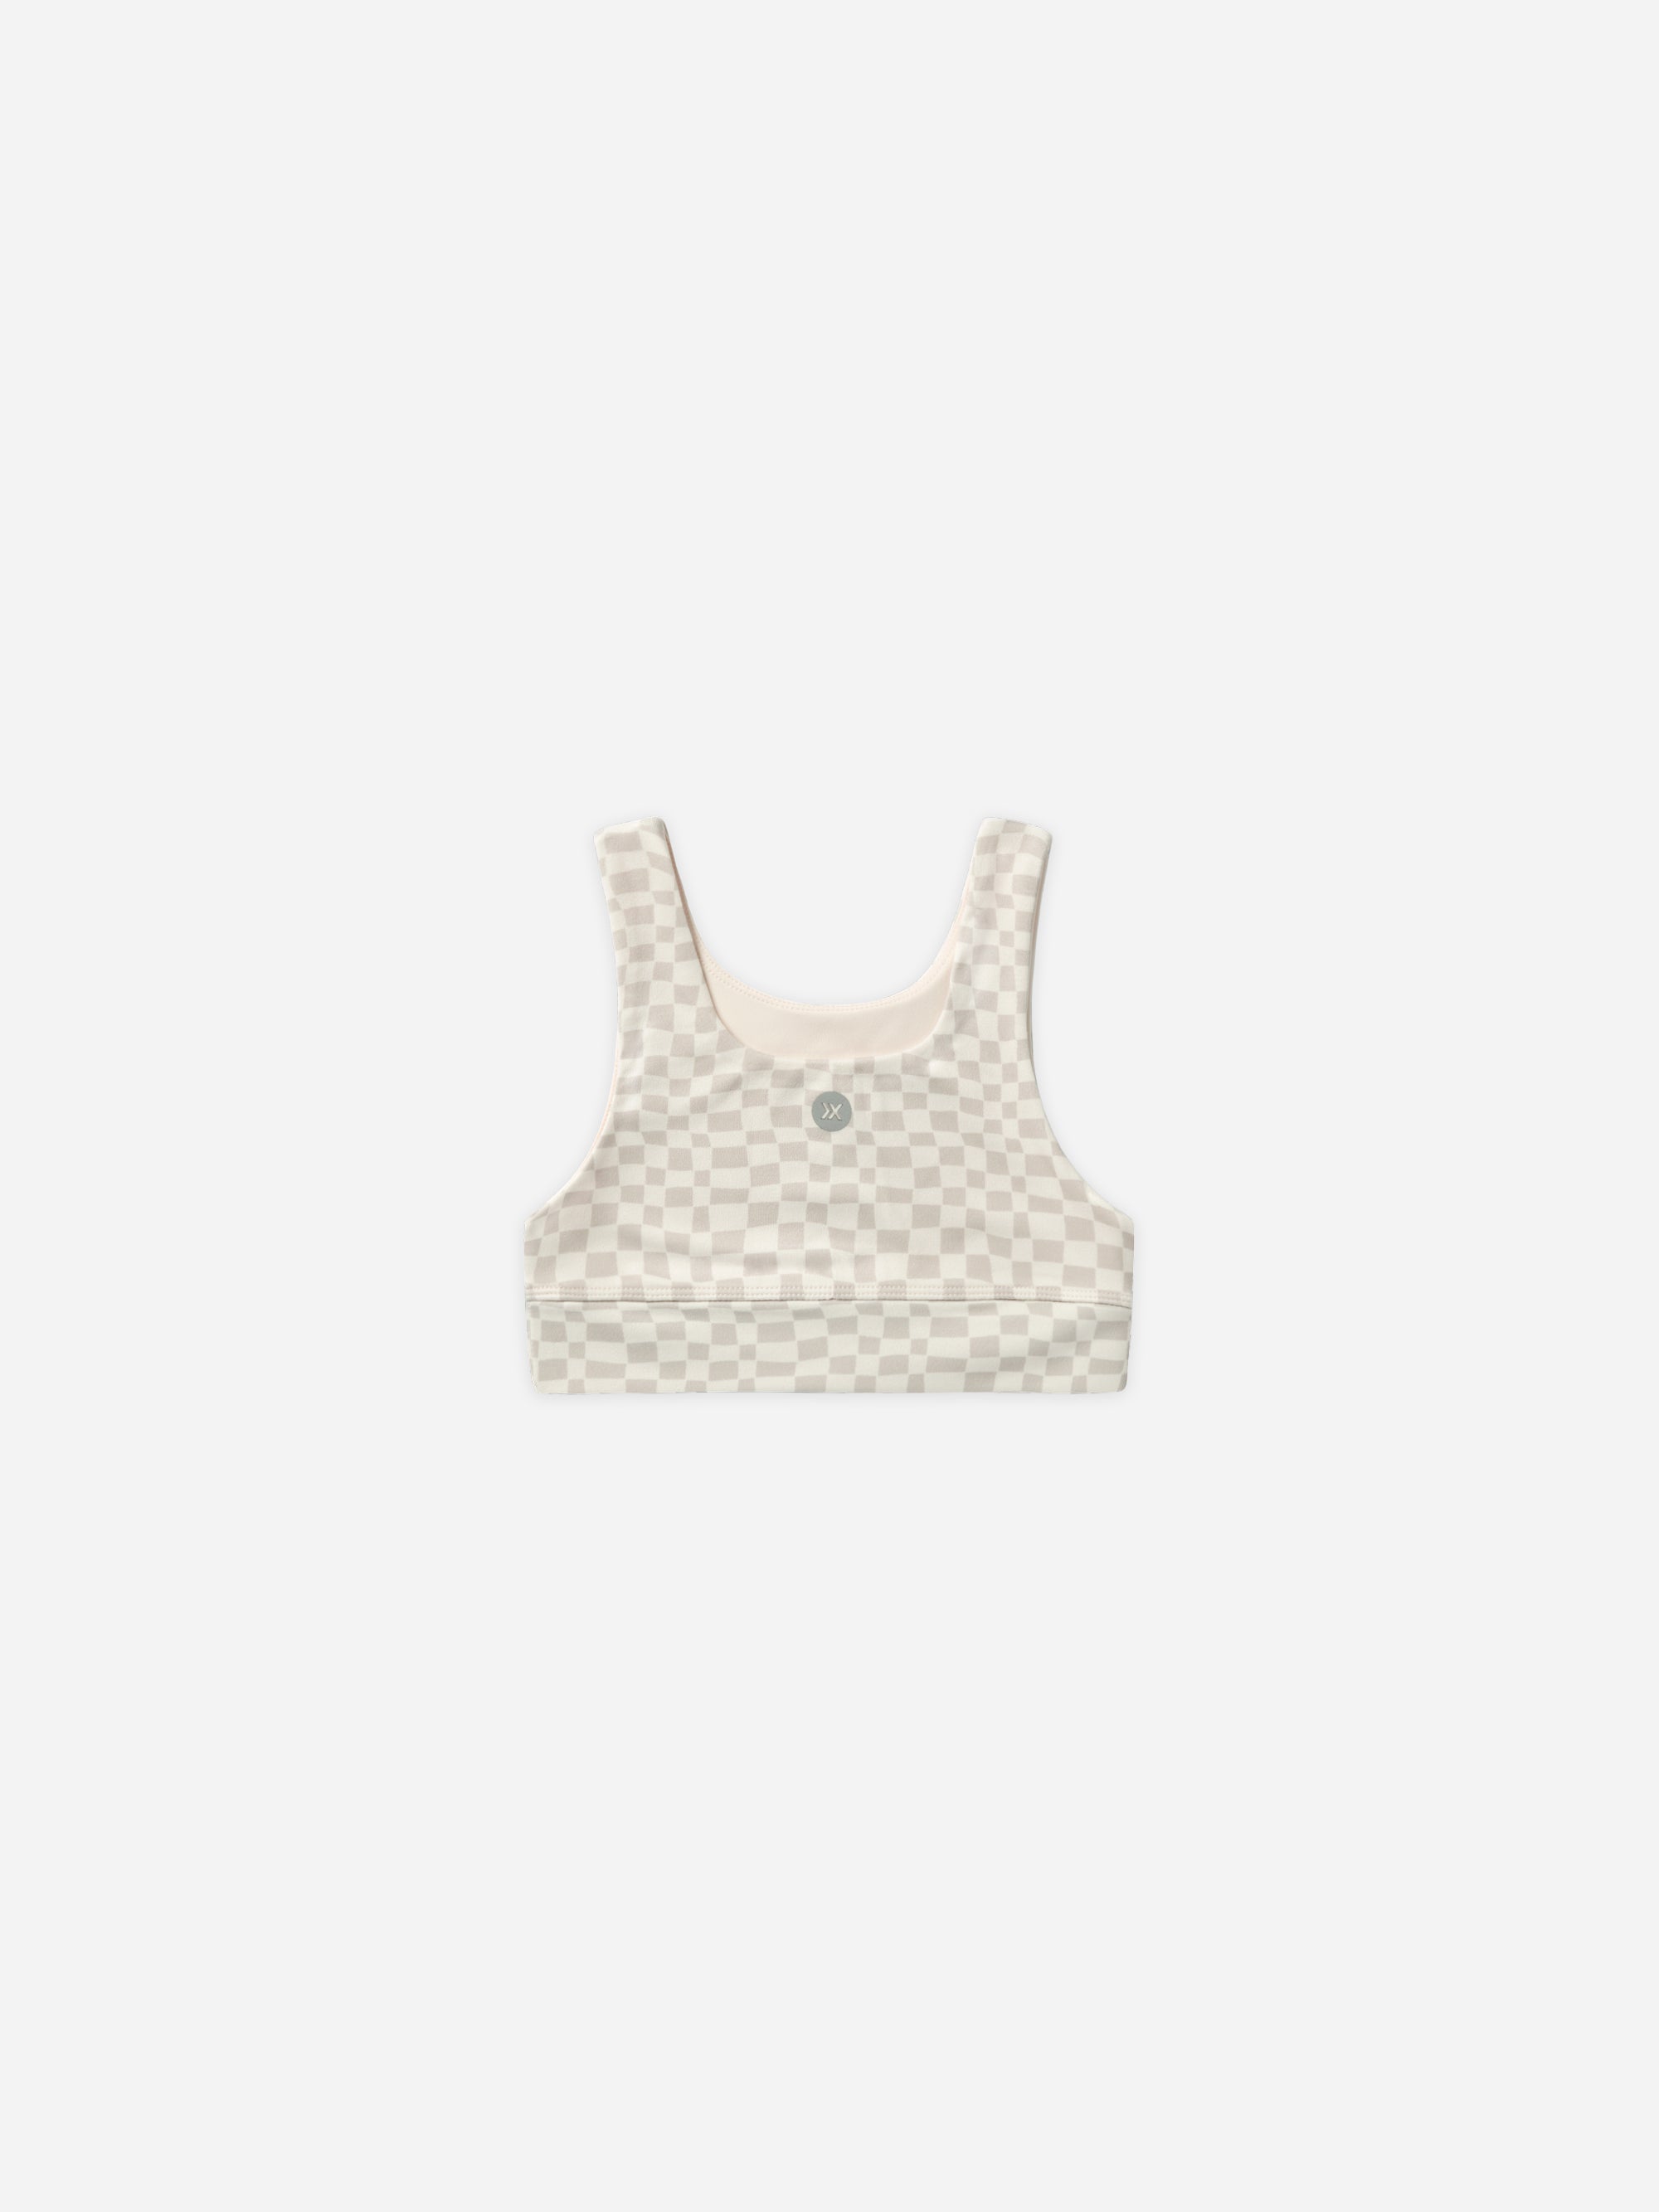 Swift Sports Bra || Dove Check - Rylee + Cru | Kids Clothes | Trendy Baby Clothes | Modern Infant Outfits |